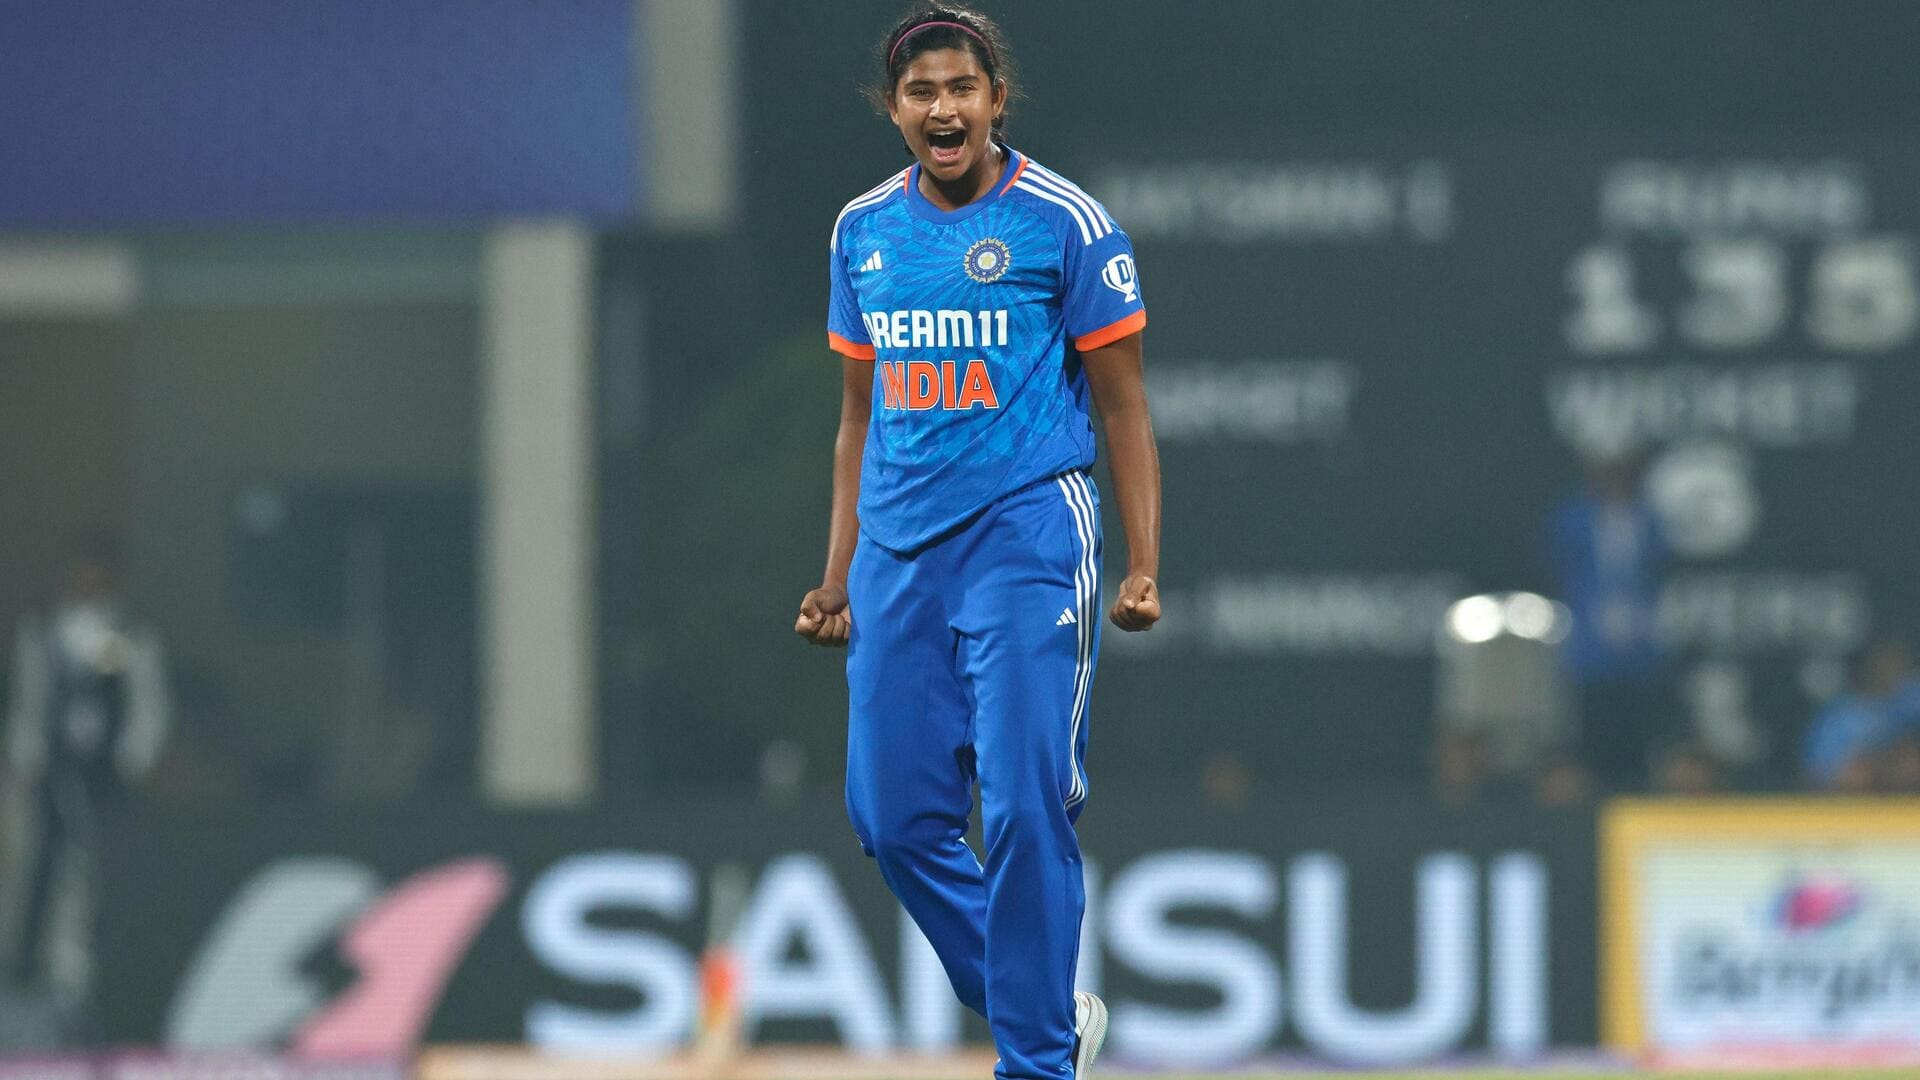 India Women pacer Titas Sadhu records her career-best T20I figures